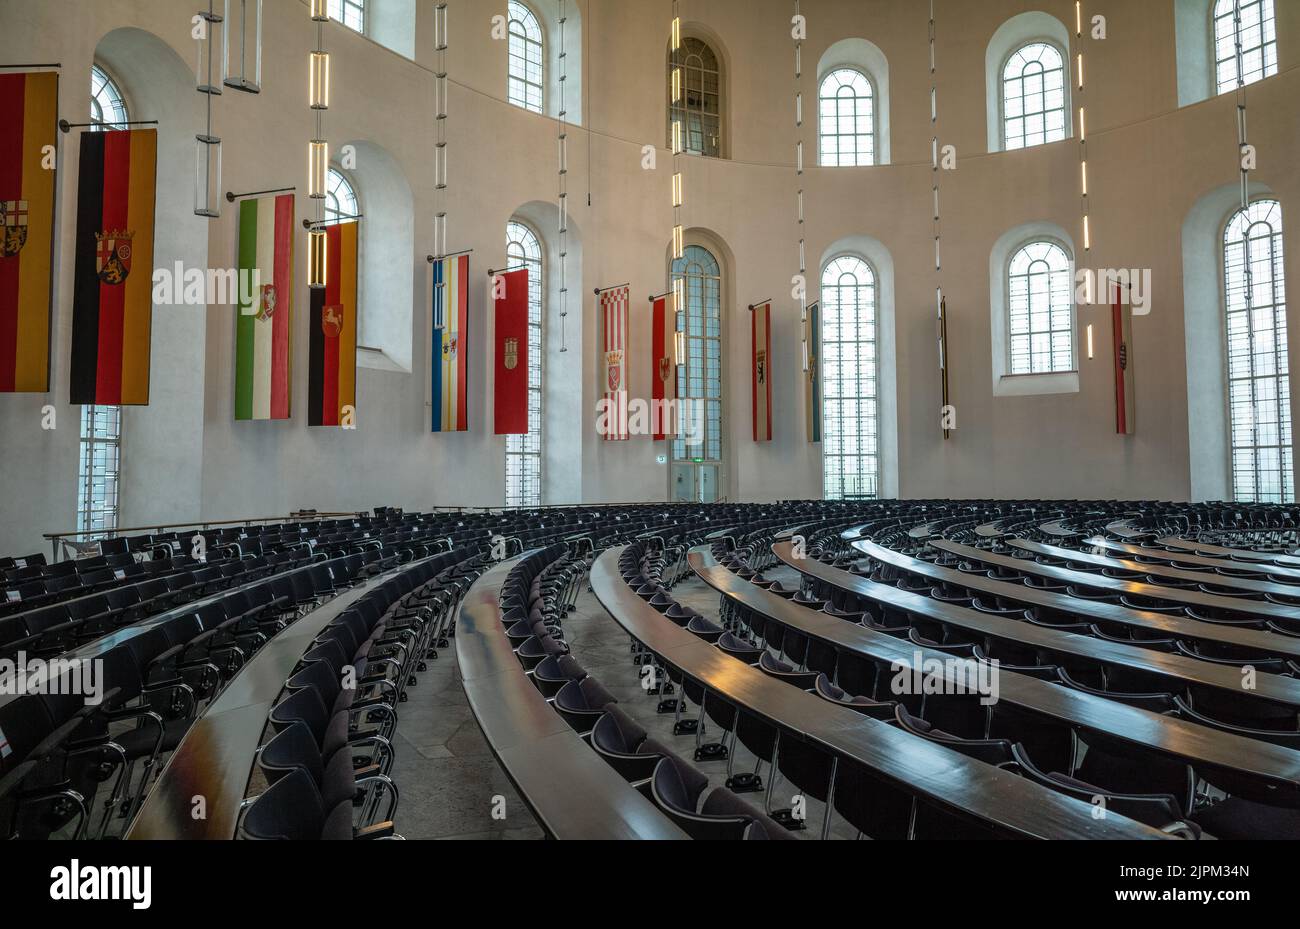 Frankfurt, Germany - July 17, 2021: Internal view of St. Paul church, First German National Aseembly Hall Stock Photo